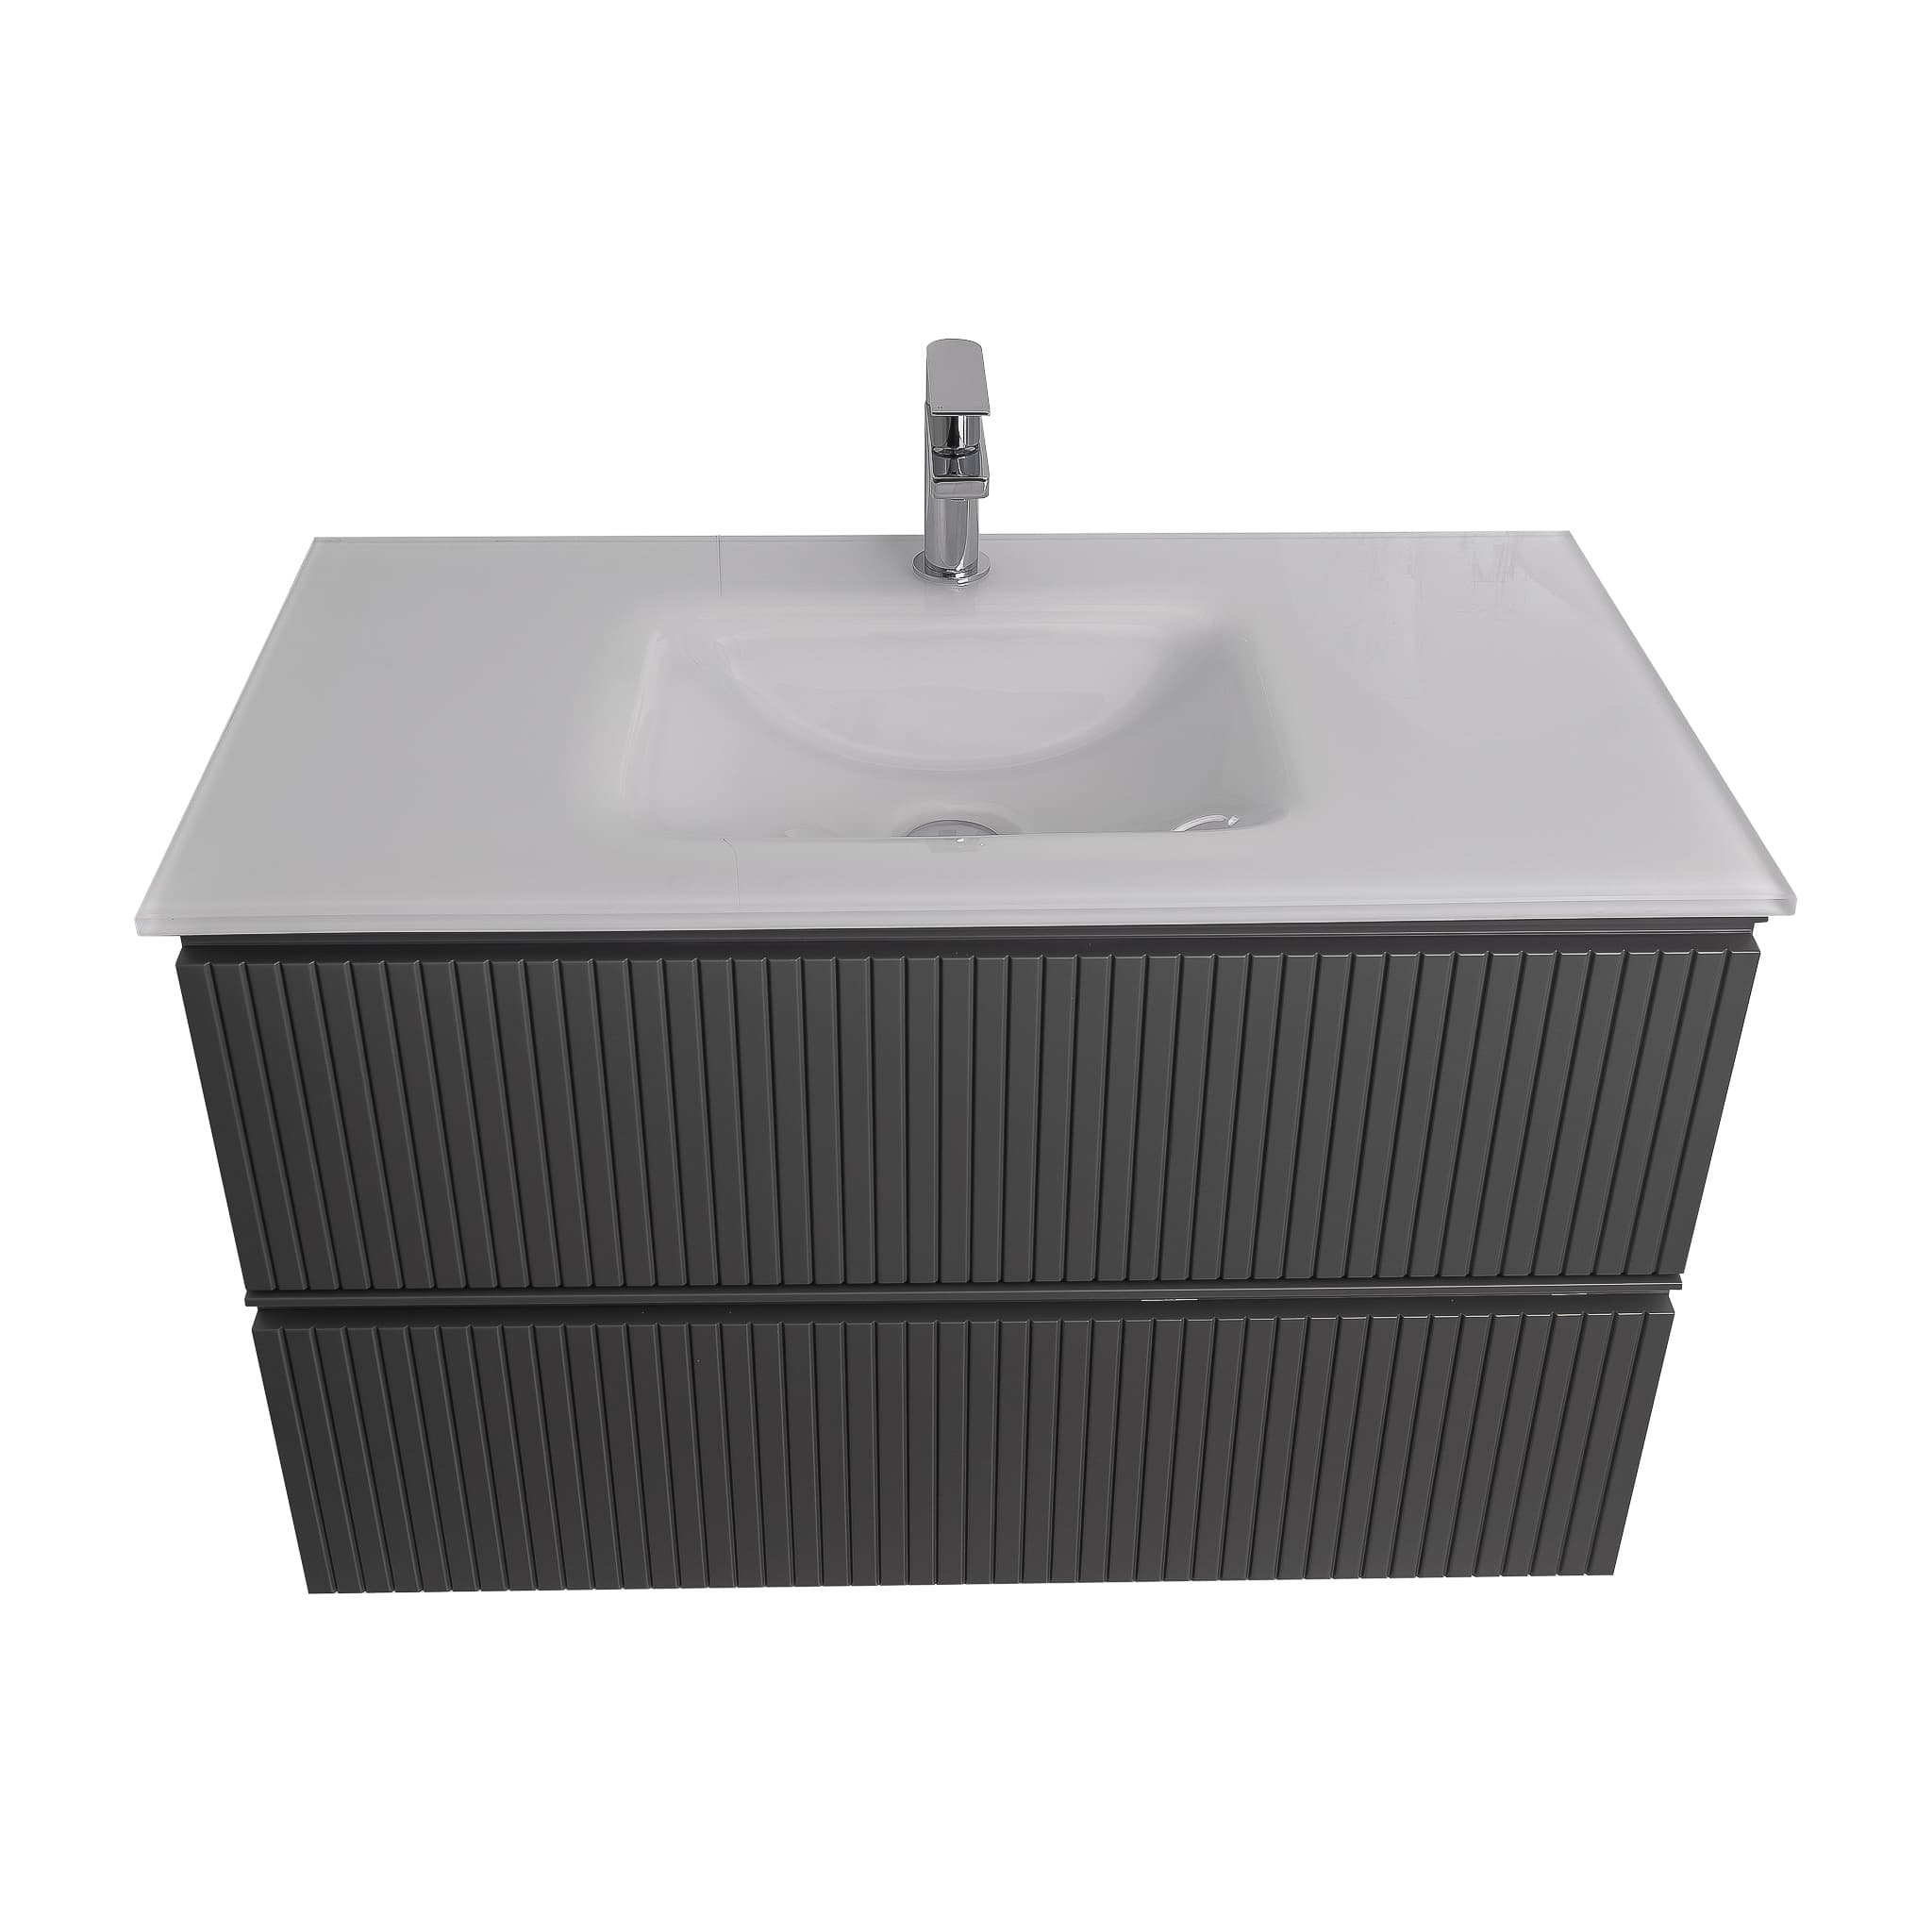 Ares 31.5 Matte Grey Cabinet, White Tempered Glass Sink, Wall Mounted Modern Vanity Set